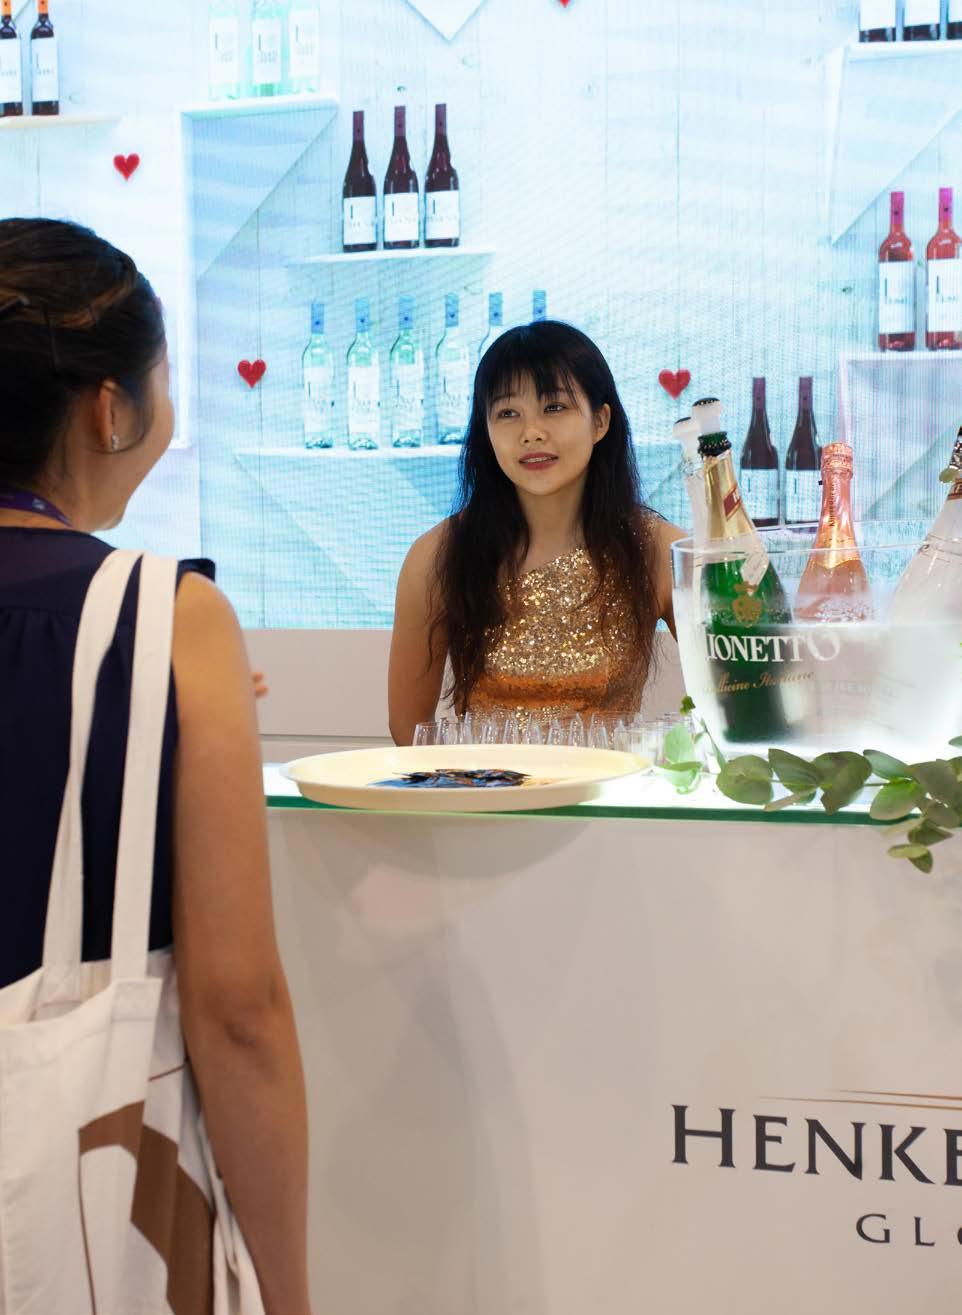 *source: VINEXPO/IWSR research study Australia, Country of Honour, had the third highest number of exhibitors at Vinexpo Hong Kong 2018, comprising 11.